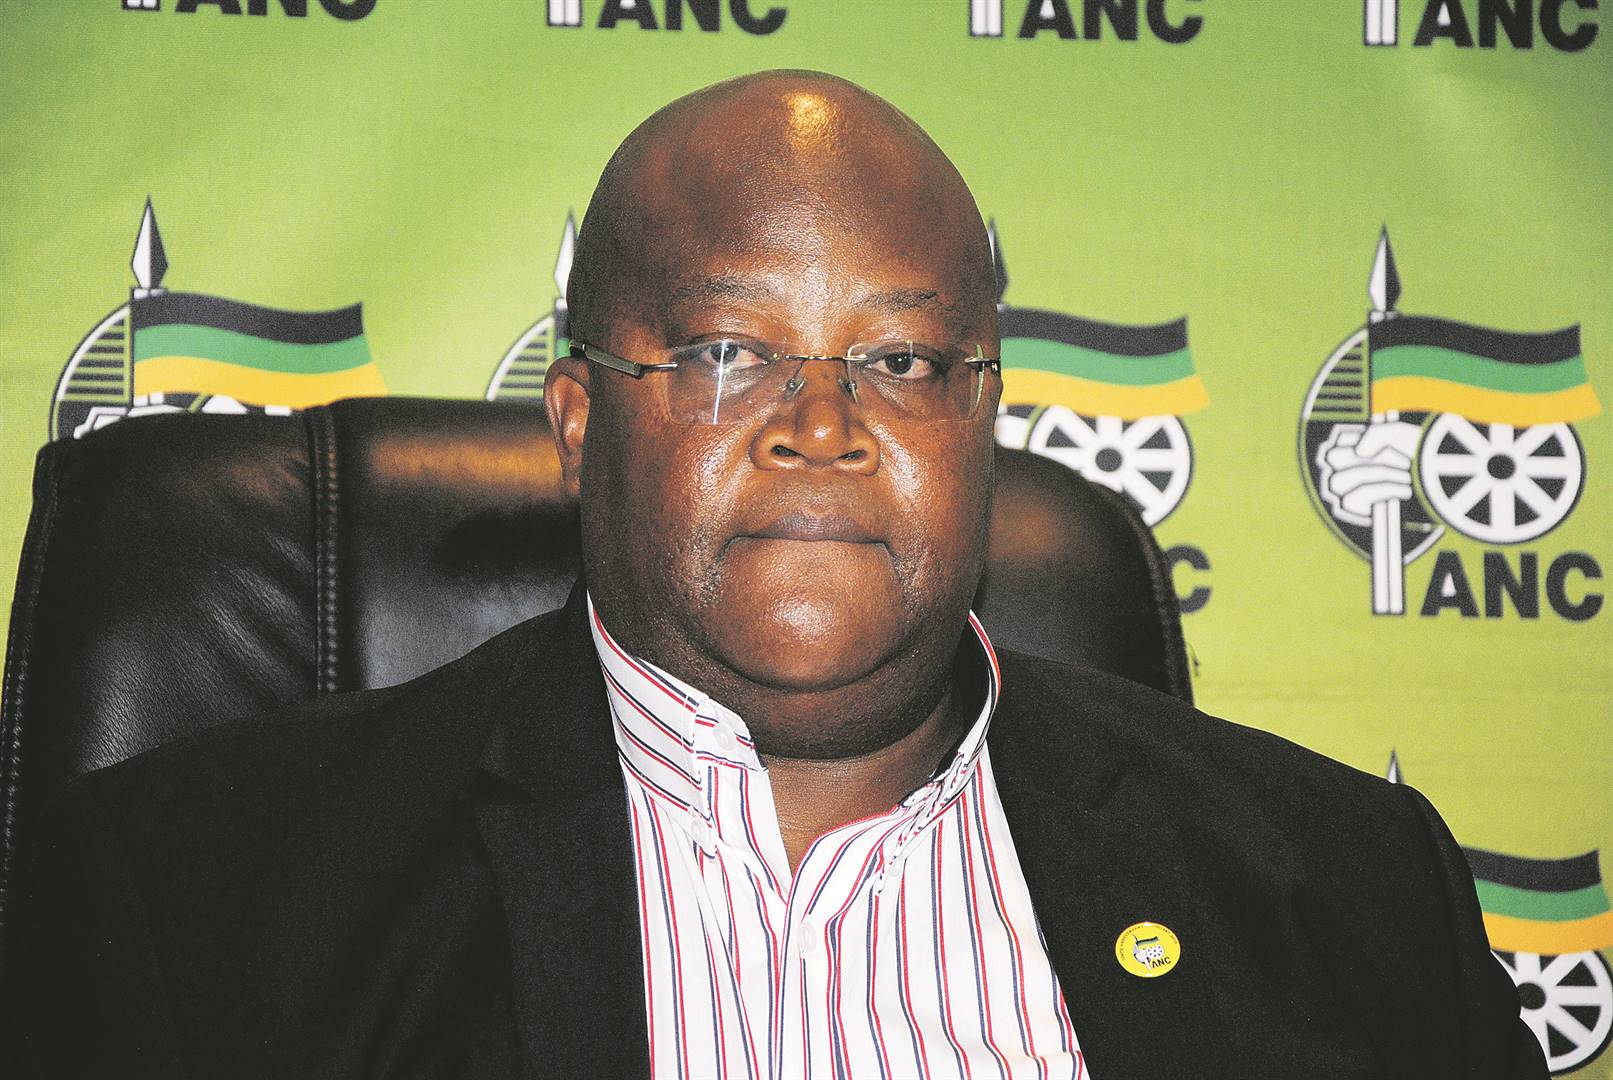 The ANC in Limpopo last weekend became the launchpad for President Cyril Ramaphosa’s re-election campaign later this year, spearheaded by both Msiza and provincial chairperson and Premier Stan Mathabatha. Photo: Supplied